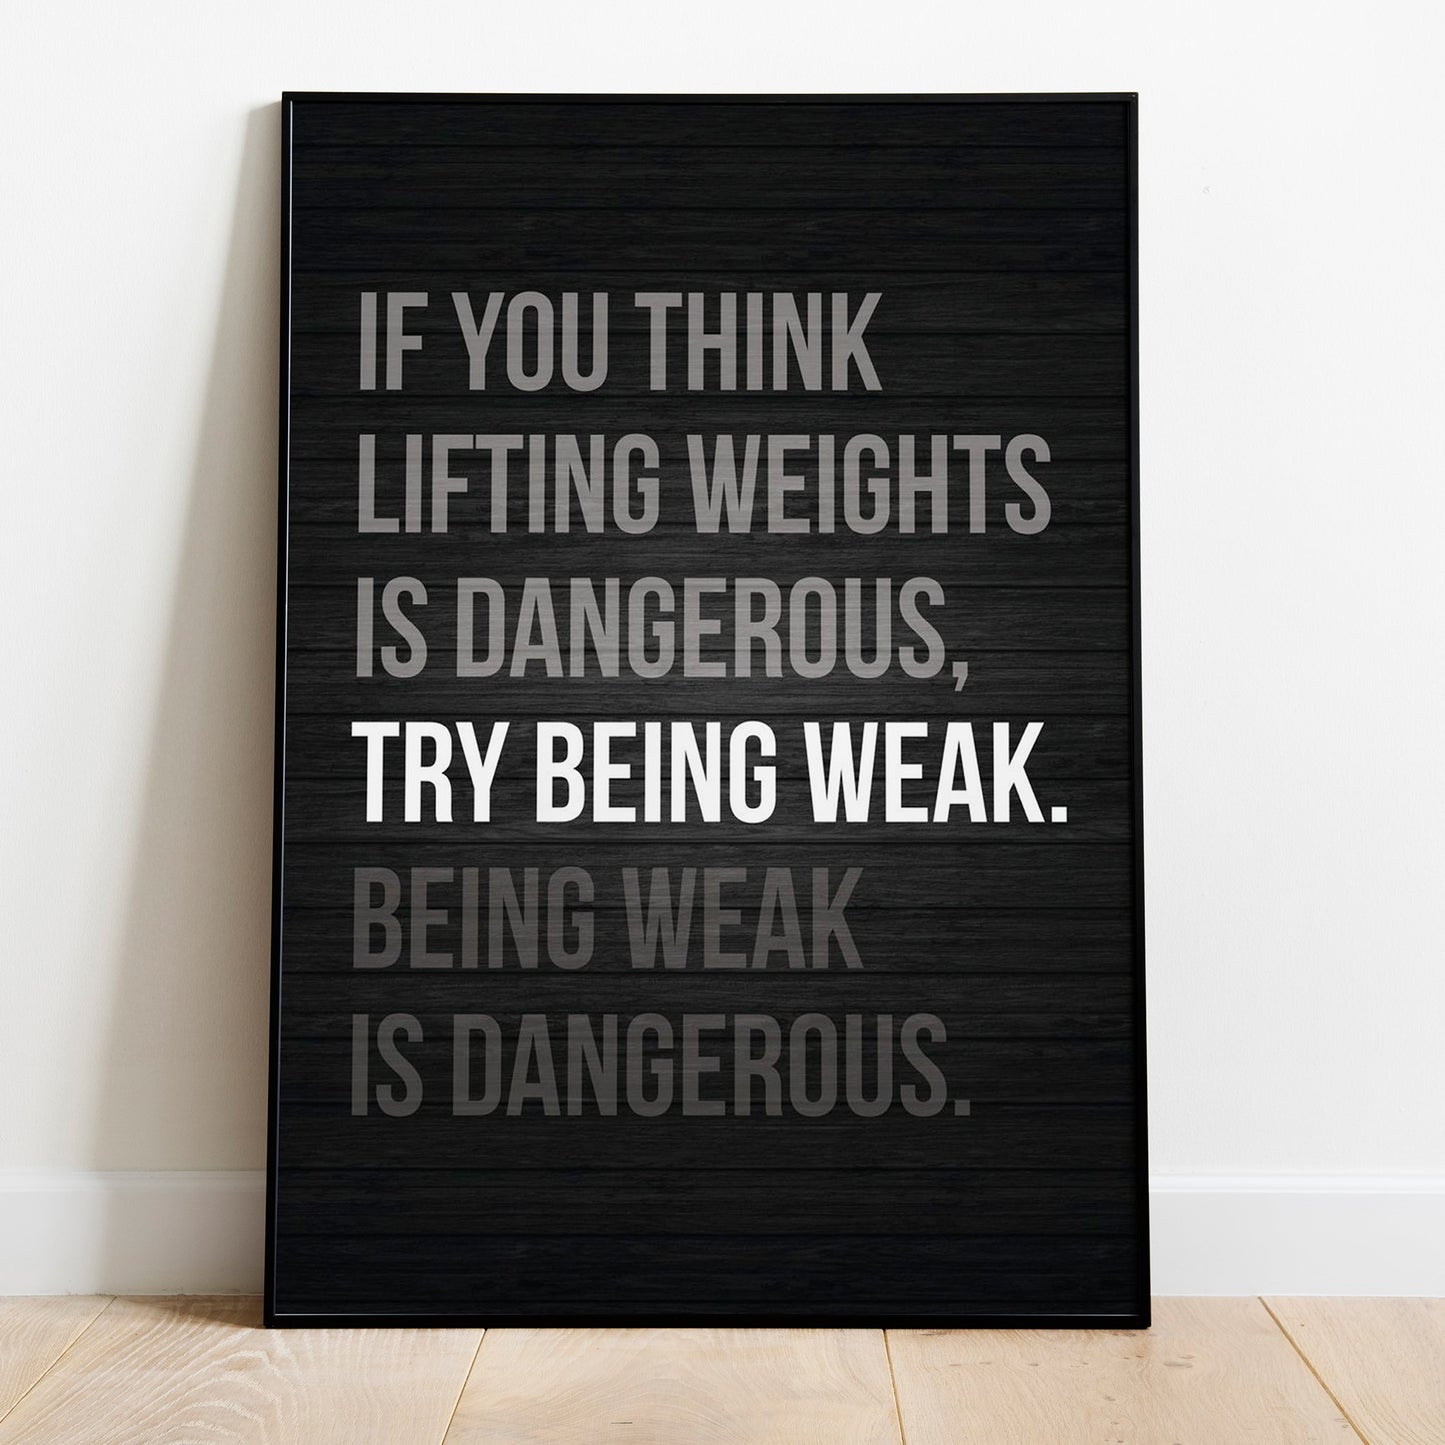 TRY BEING WEAK Wall Art Poster for Home Office